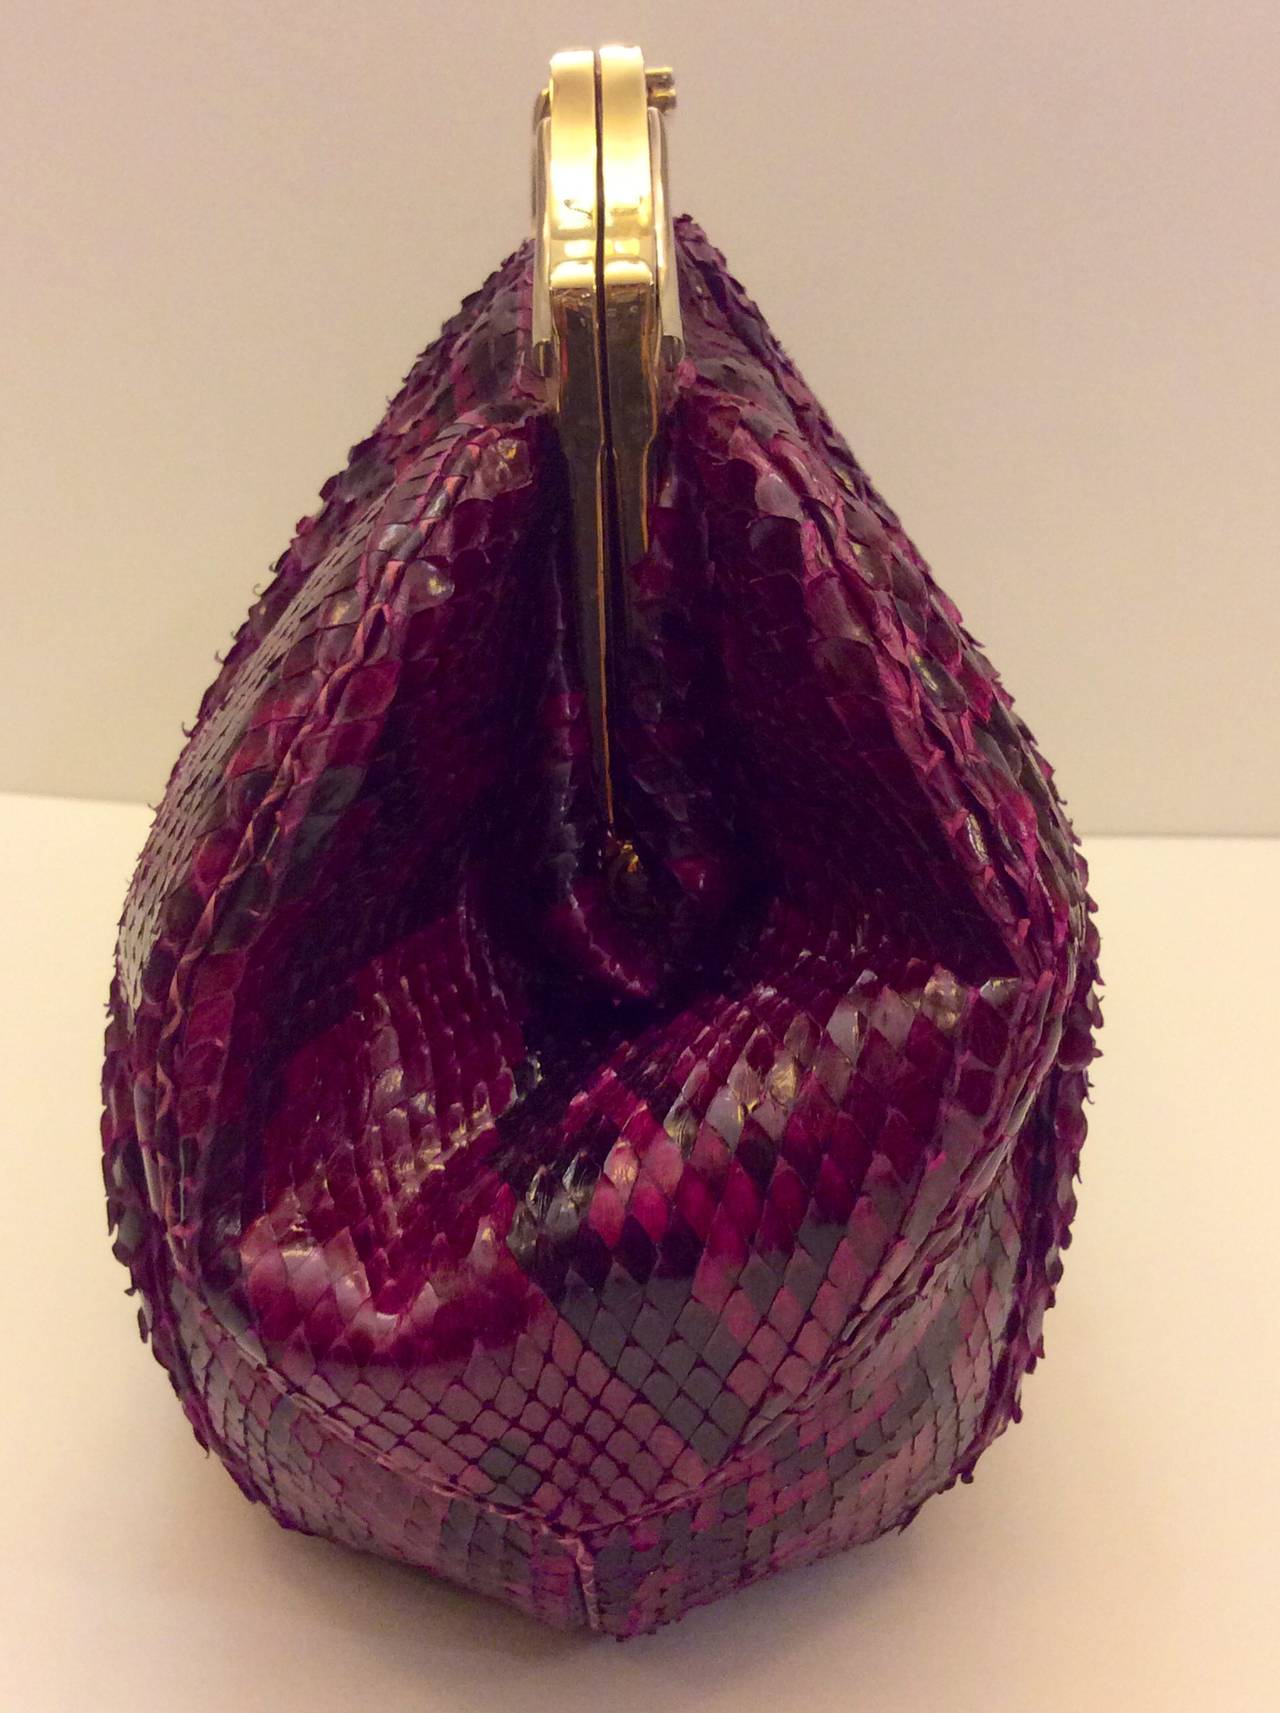 This is a gorgeous Judith Leiber clutch with optional gold chain. The handbag is composed of a striking magenta snakeskin and features gather details. There are two interior zipper & slot compartments and snap closures. This purse was hardly used,